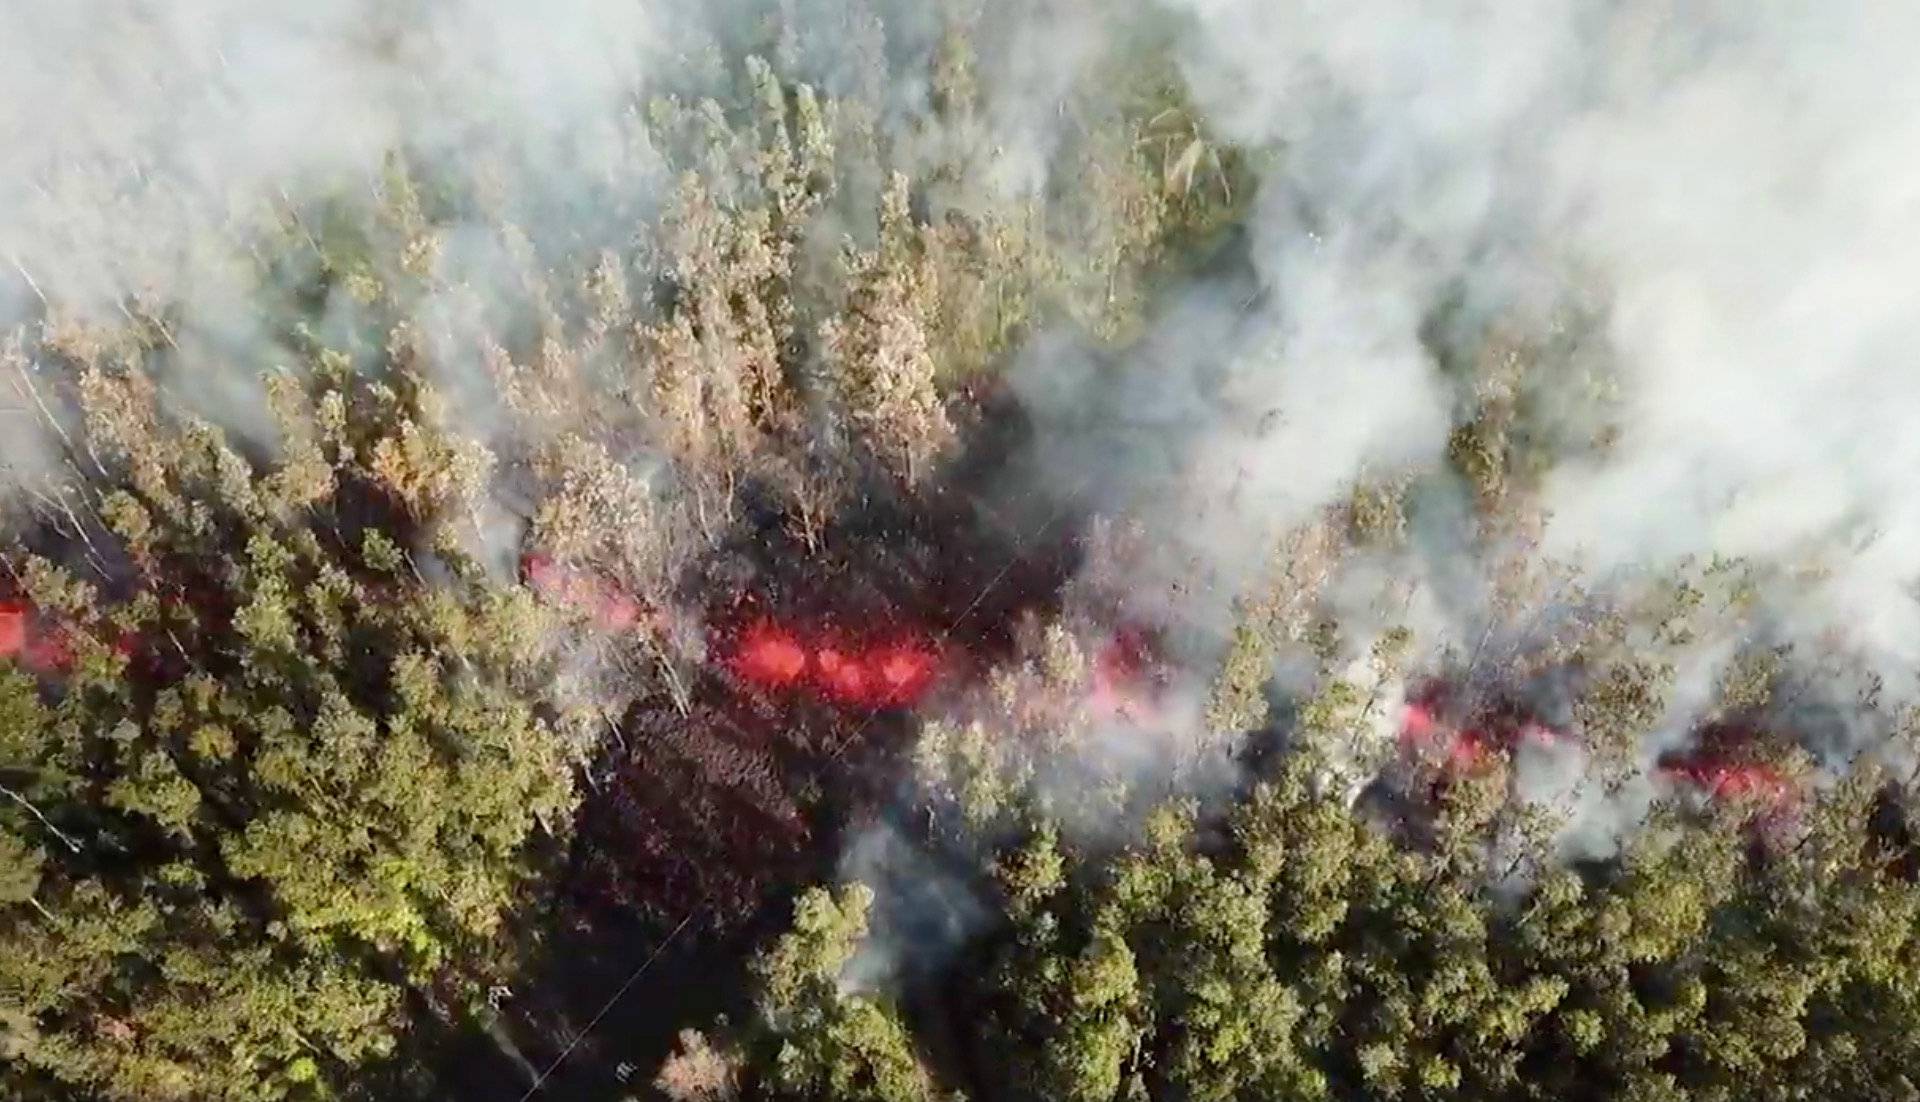 Lava emerges from the ground after Kilauea Volcano erupted, on Hawaii's Big Island